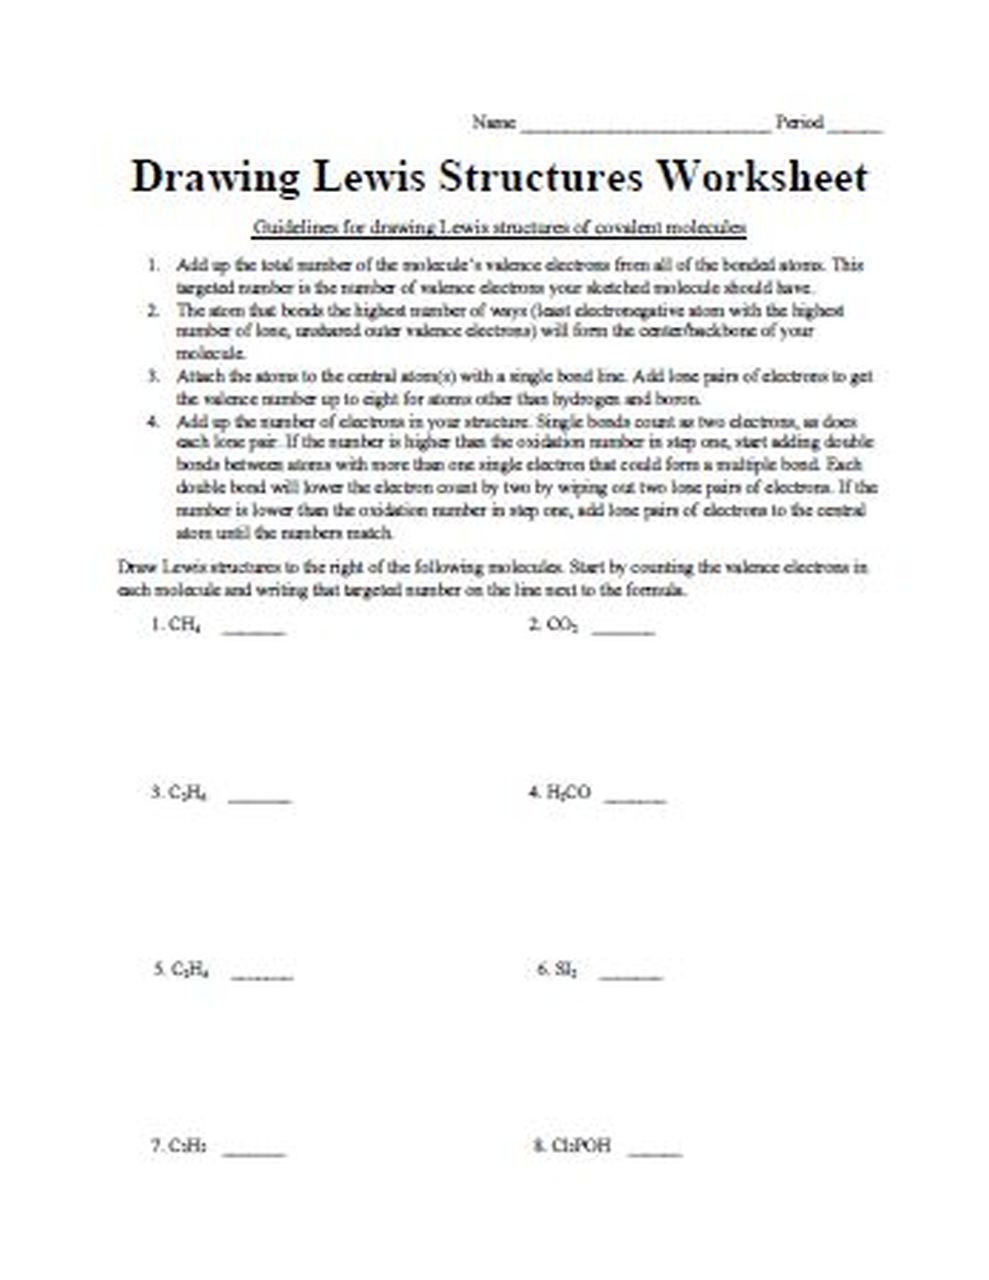 Lewis Structures Worksheet with Answers Drawing Lewis Structures Worksheet